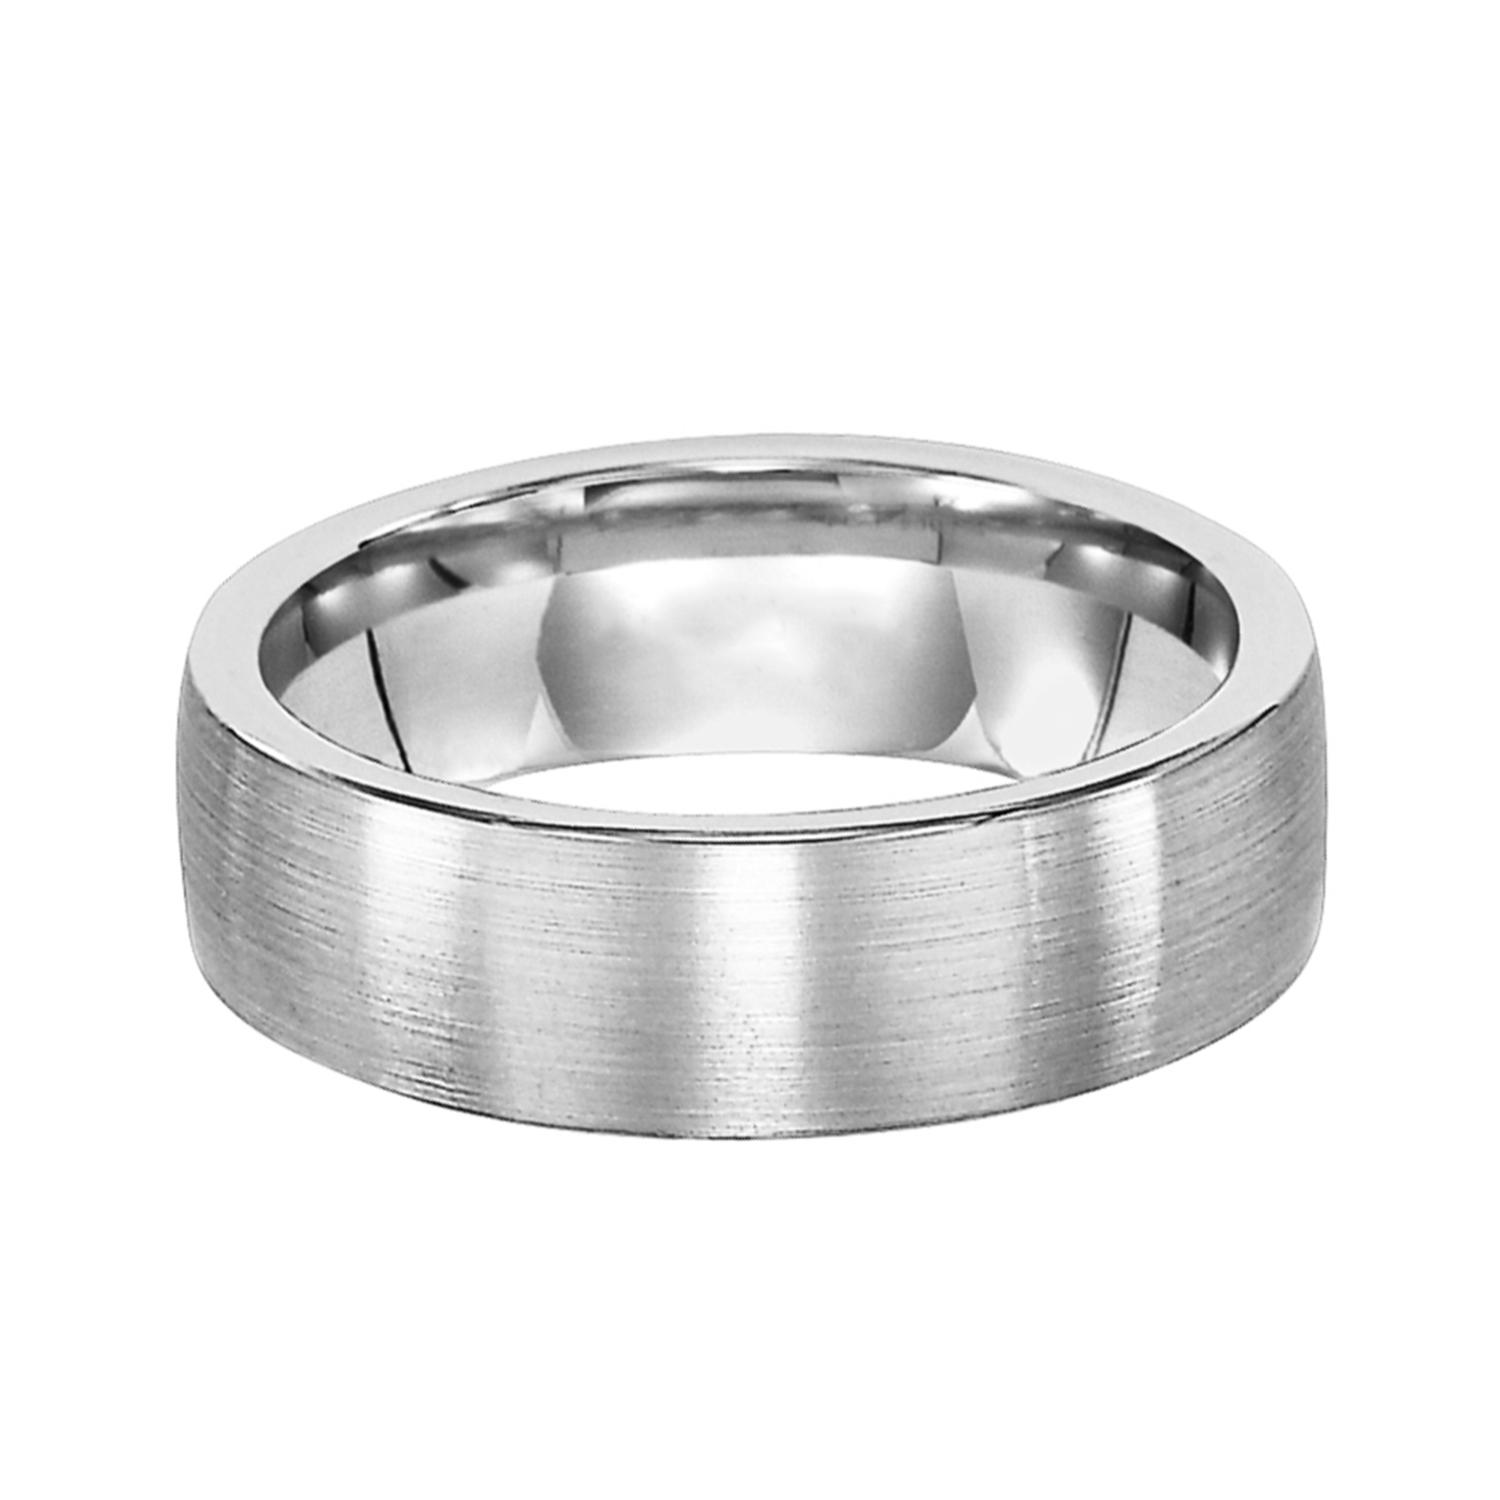 Gents 14K White Gold Wedding Band with Rolled Edge 0